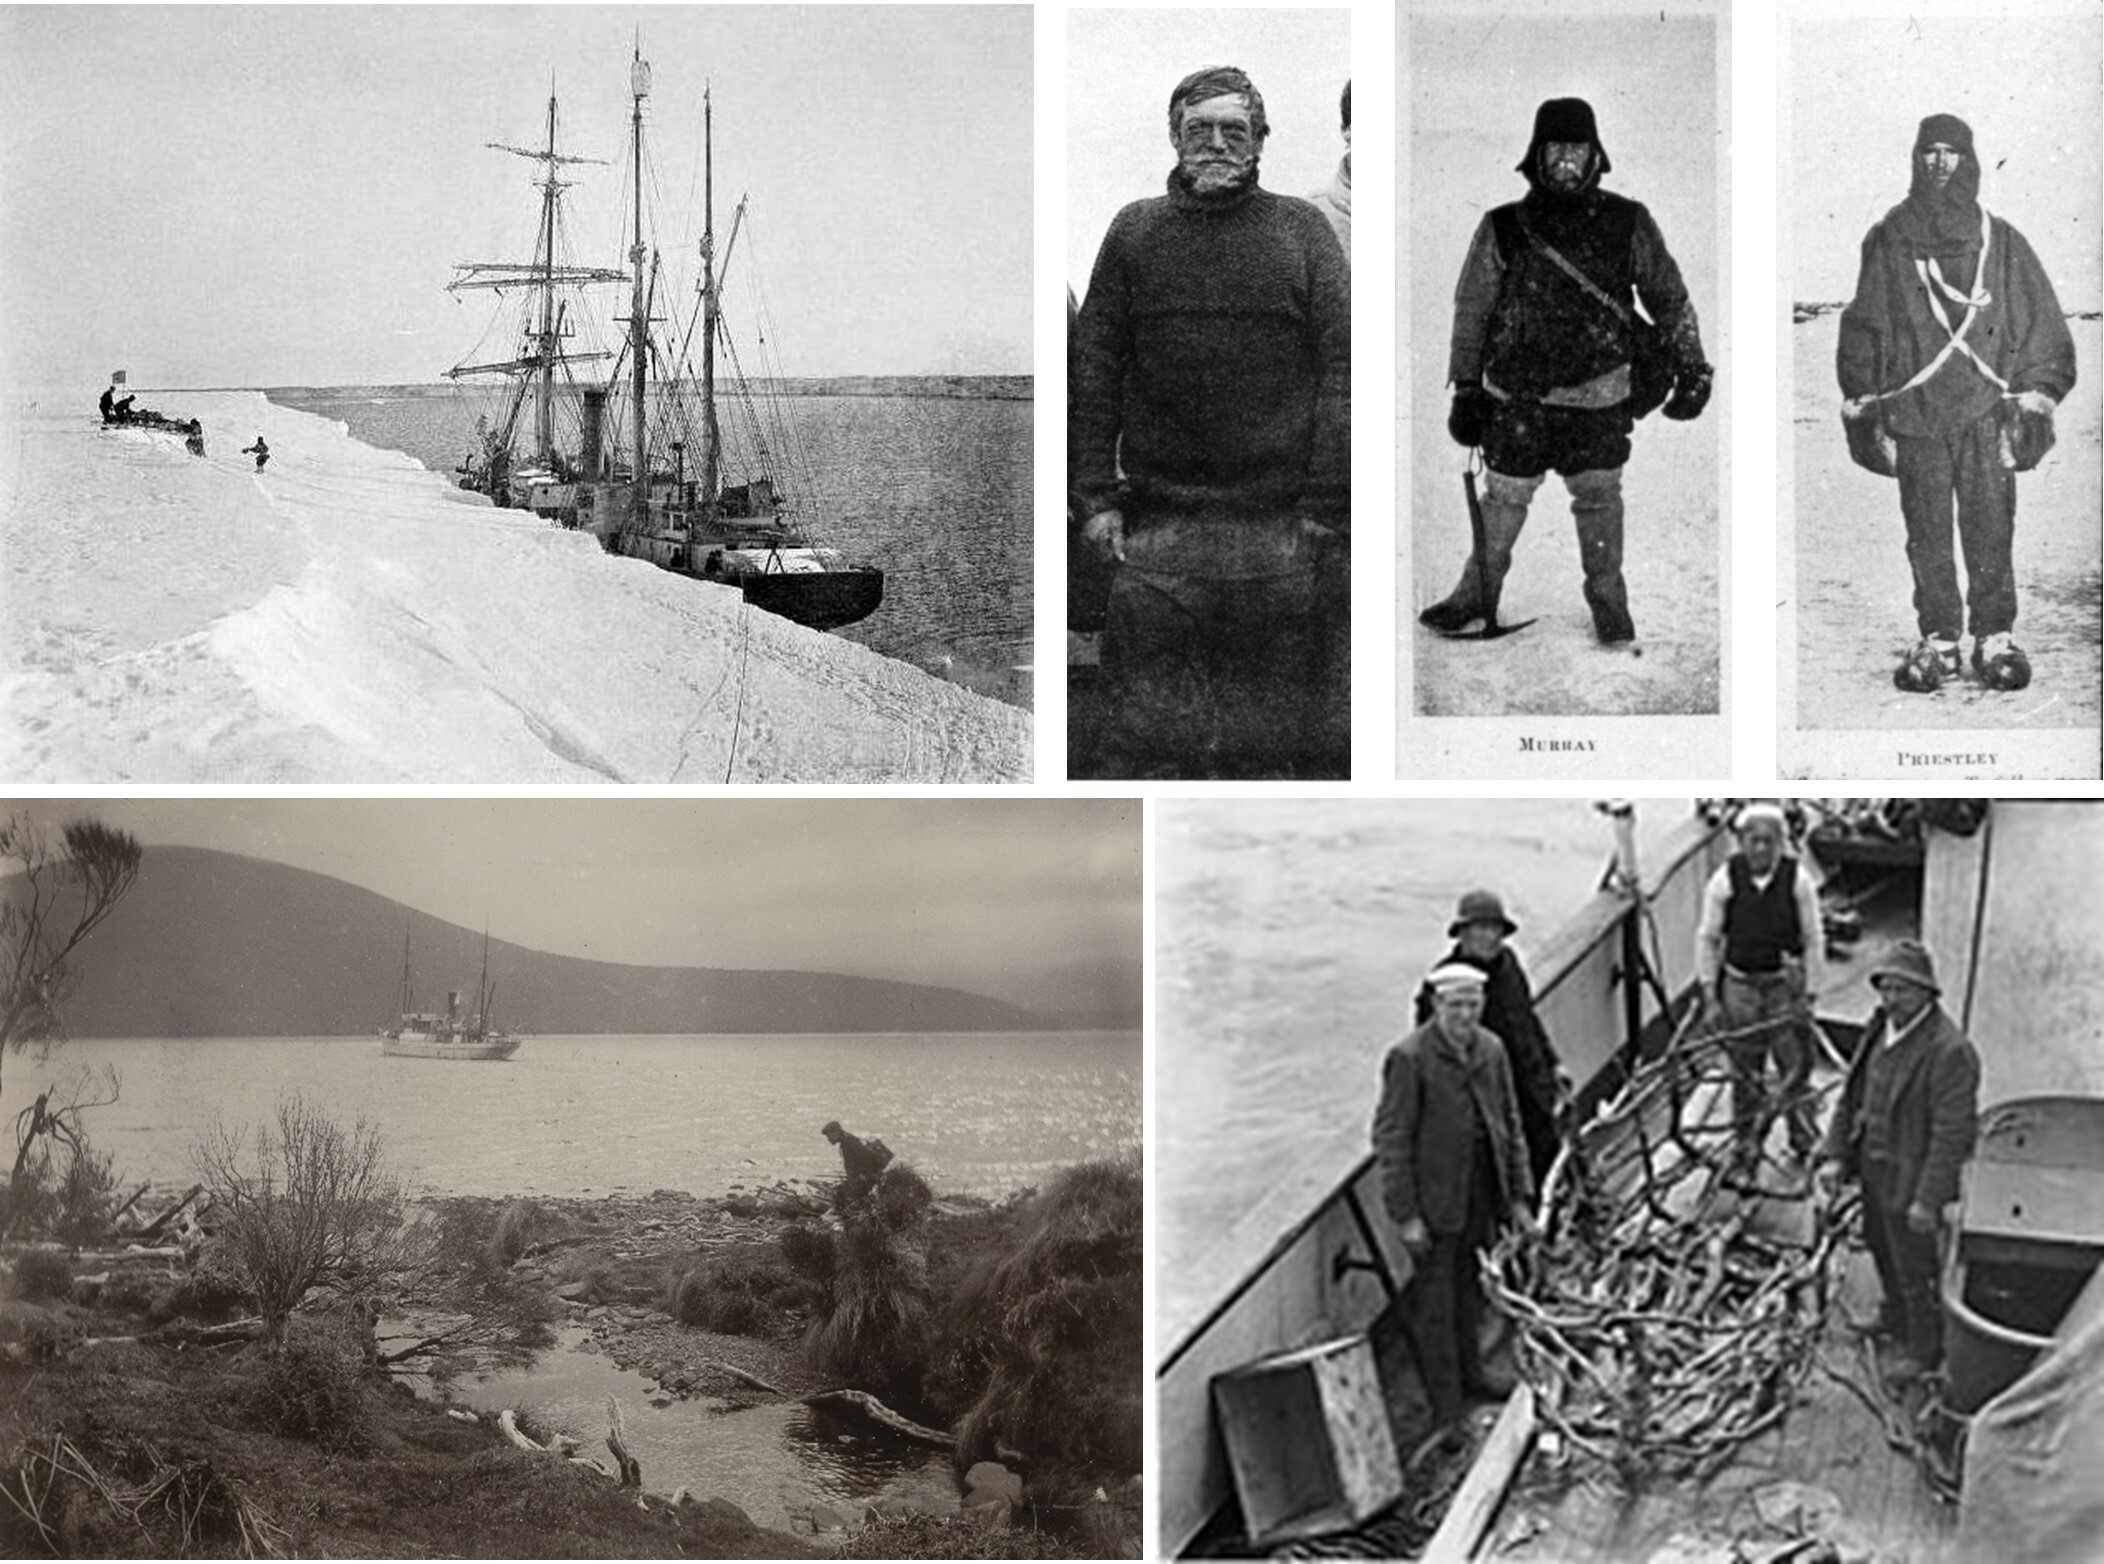 Clockwise from top left: the Nimrod on Shackleton's 1907–1909 Antarctic expedition; three members of the expedition including Ernest Shackleton (left), James Murray (middle), and Raymond Priestley (right); some crew members aboard the Hinemoa showing the frame of the boat used by the Dundonald shipwreck survivors which can be seen on display in the Museum today; the Hinemoa on the 1907 sub-Antarctic expedition anchored offshore from Motu Maha (Auckland Island). Hinemoa images: Canterbury Museum 1982.103.29, Alexander Turnbull Library PA1-q-228-09-3. All other images: Wikimedia Commons